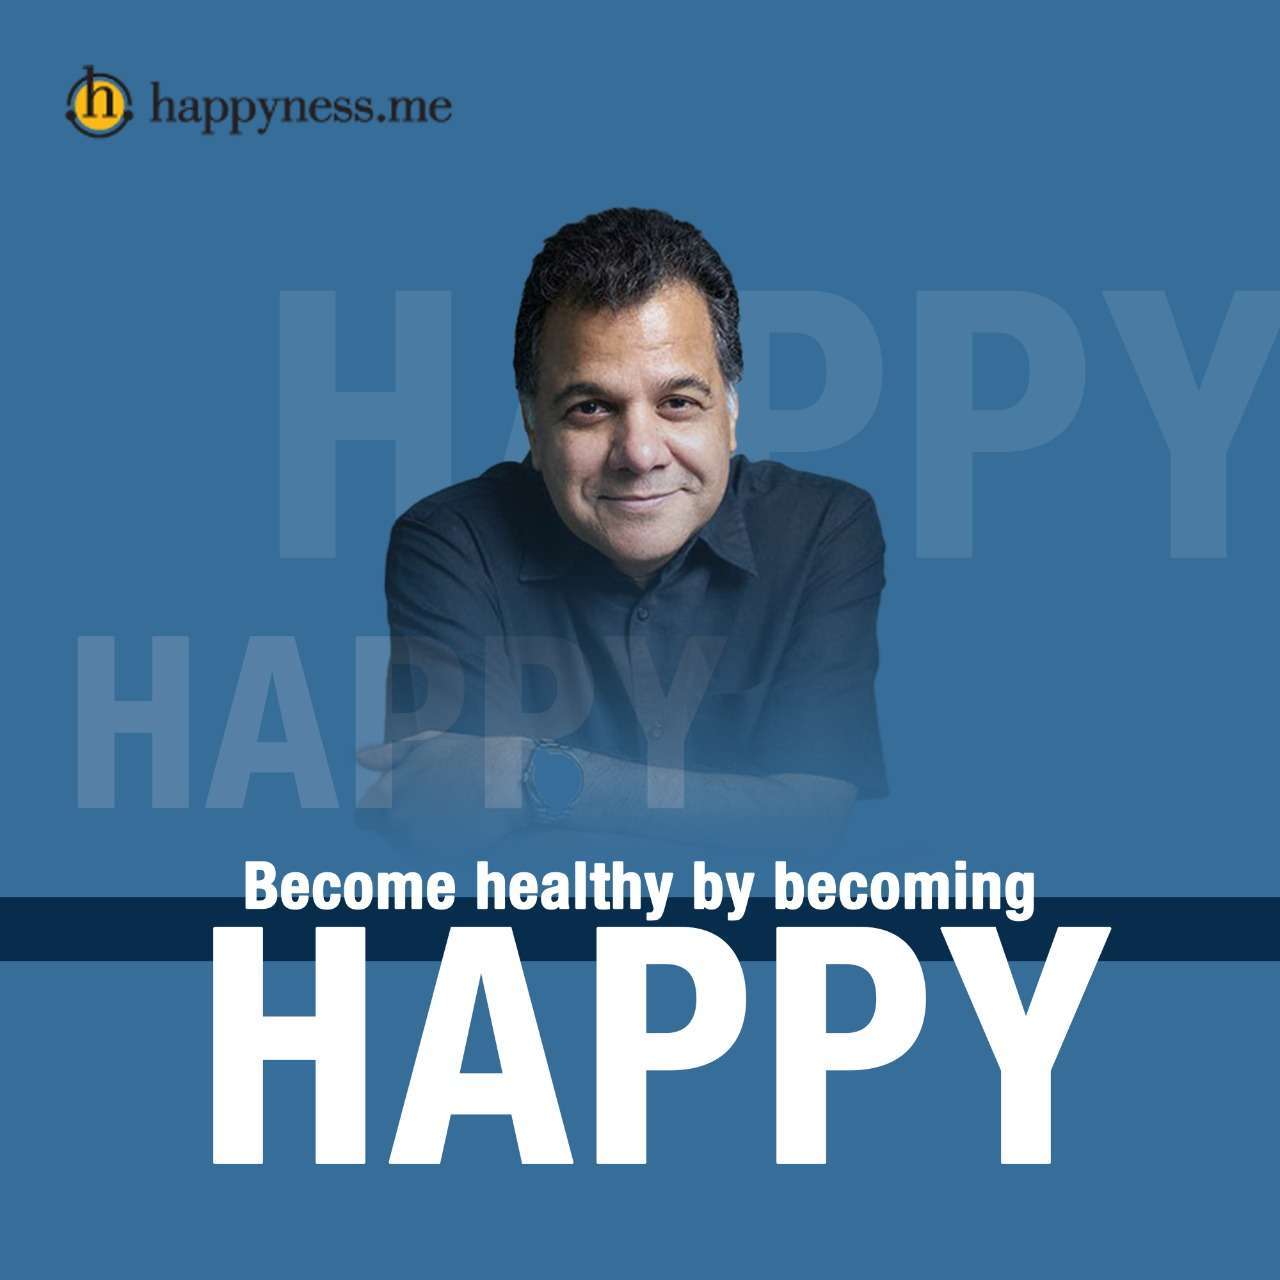 Get Happy Work Culture with Happiness – The Ultimate Key to a Productive Workplace